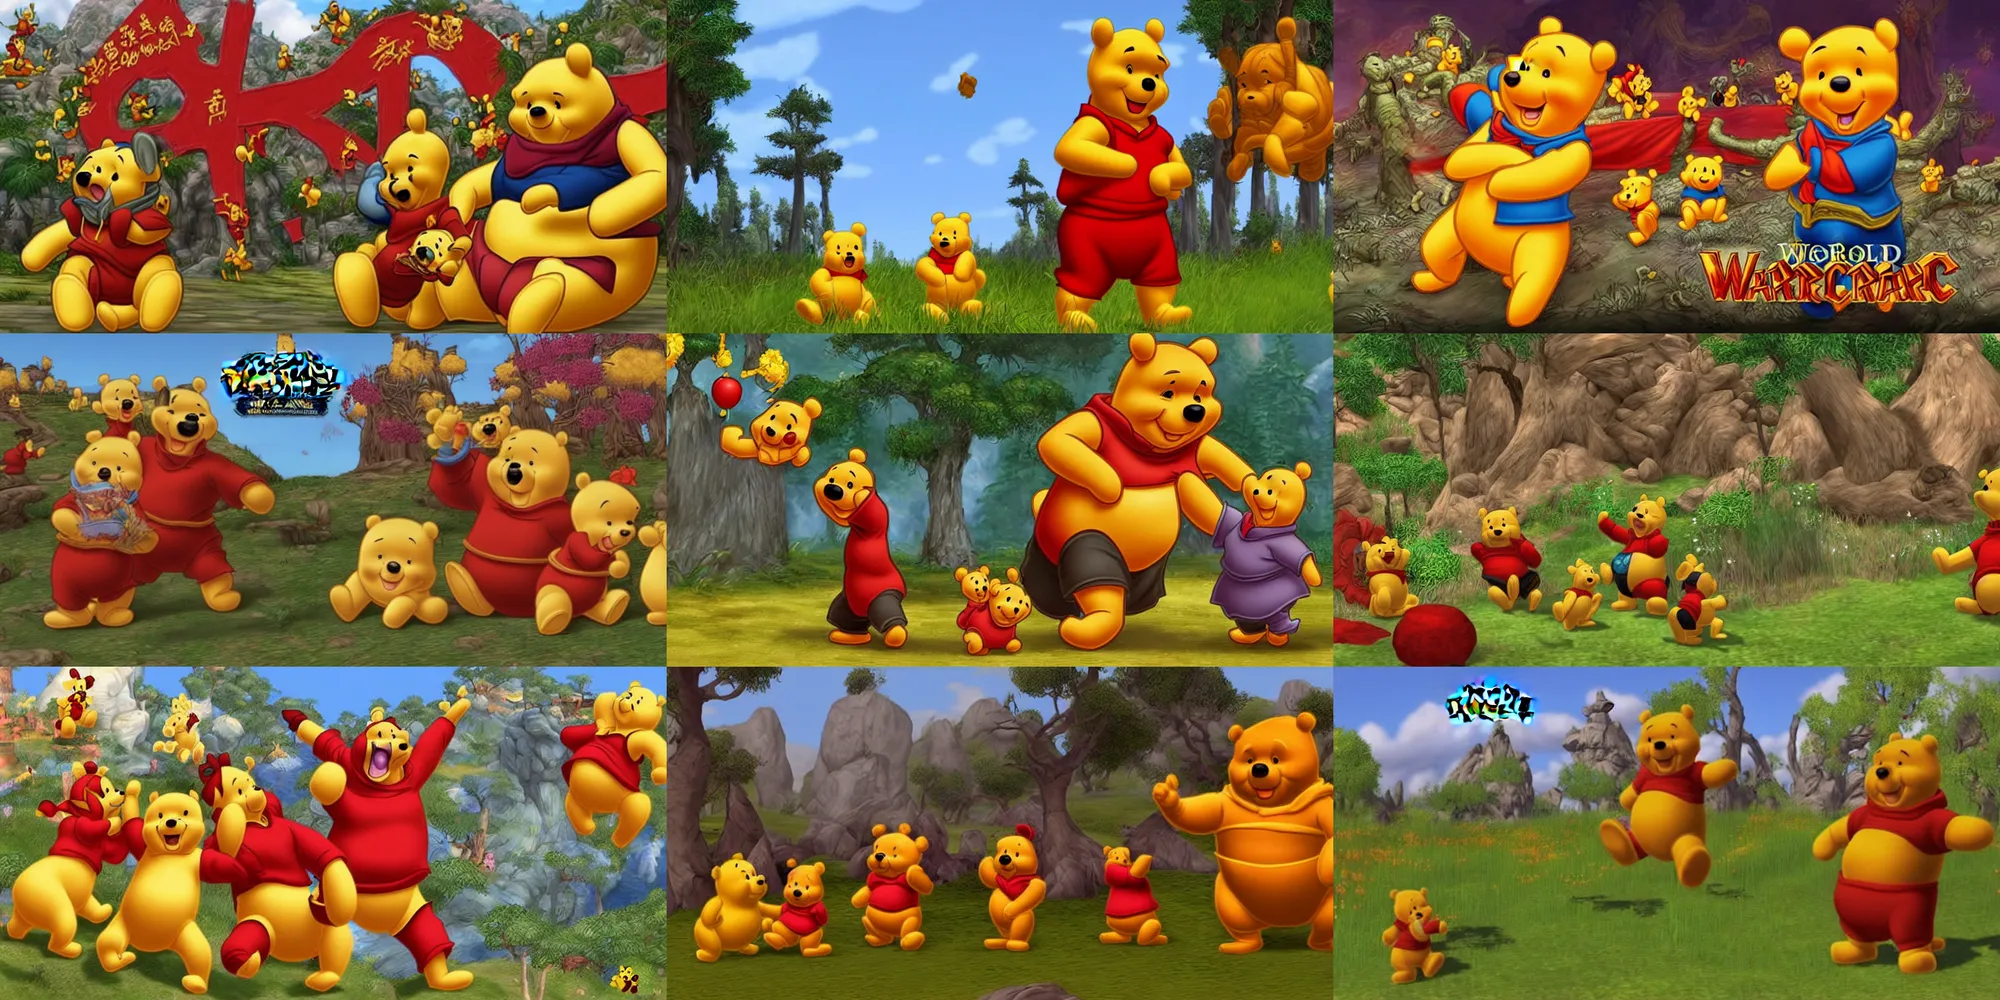 Prompt: xi jinping and winnie the pooh in world of warcraft